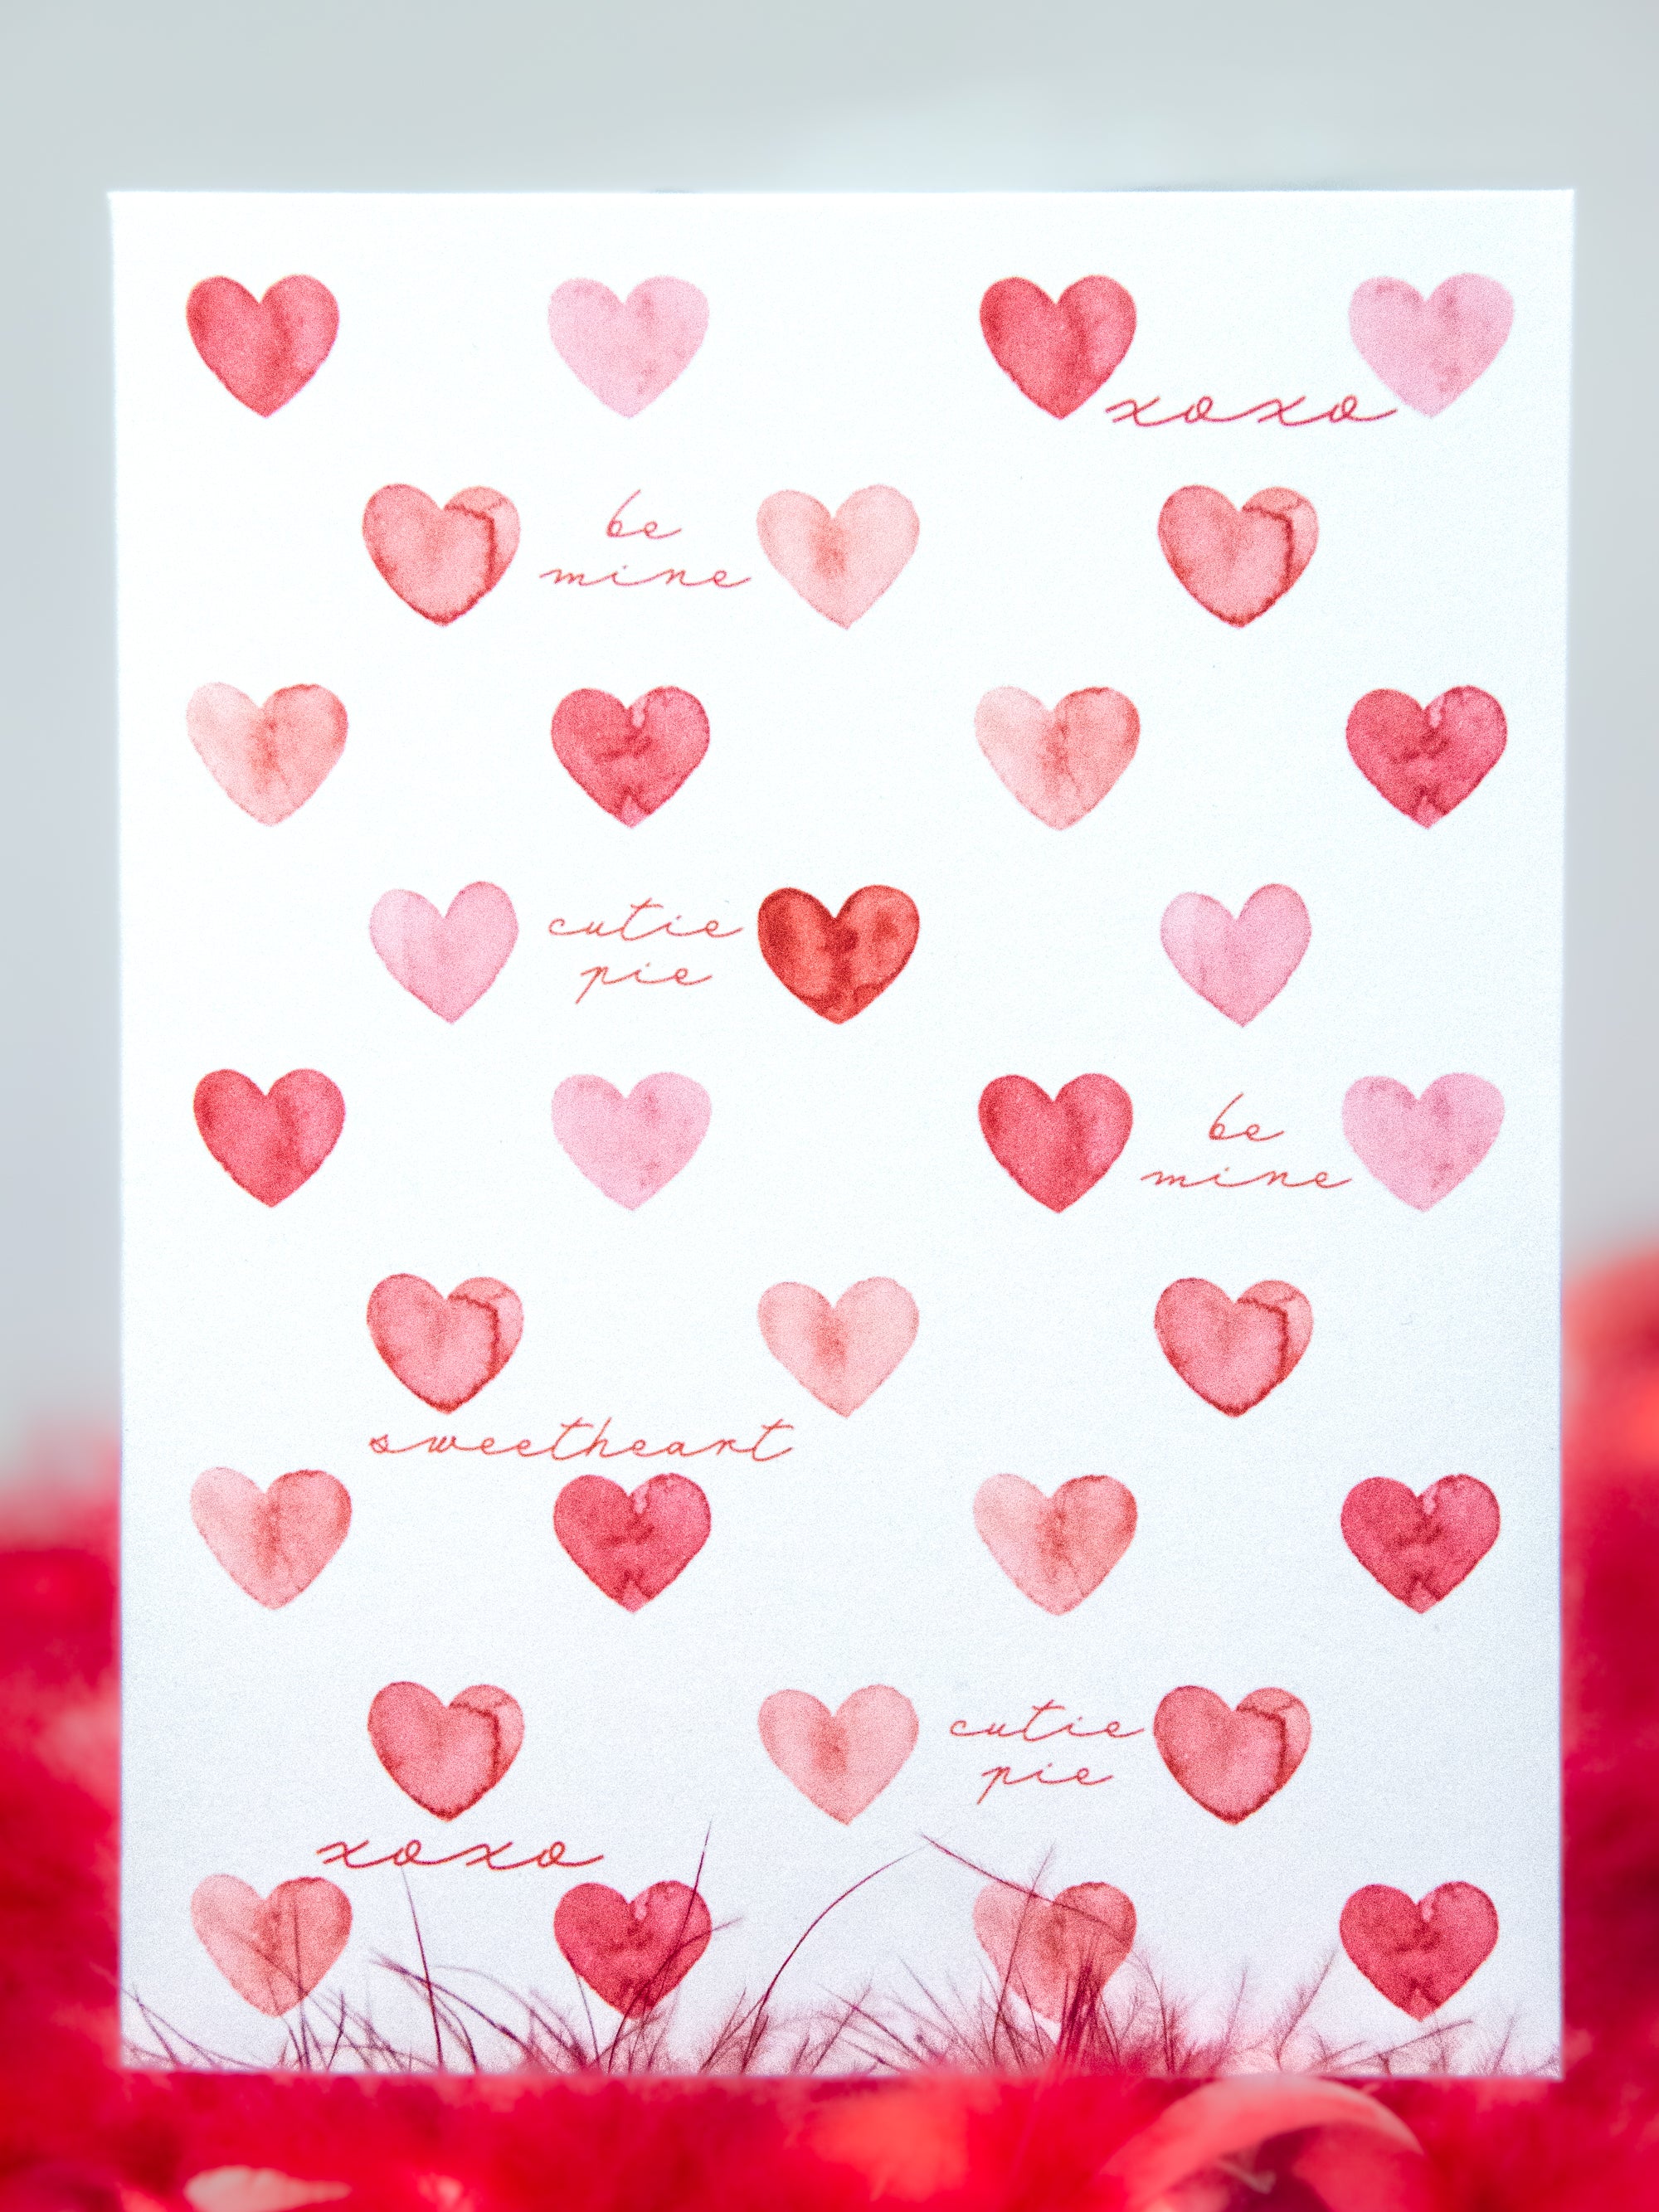 CLASSIC RED & PINK VALENTINE'S DAY DECORATIONS – Bonjour Fête